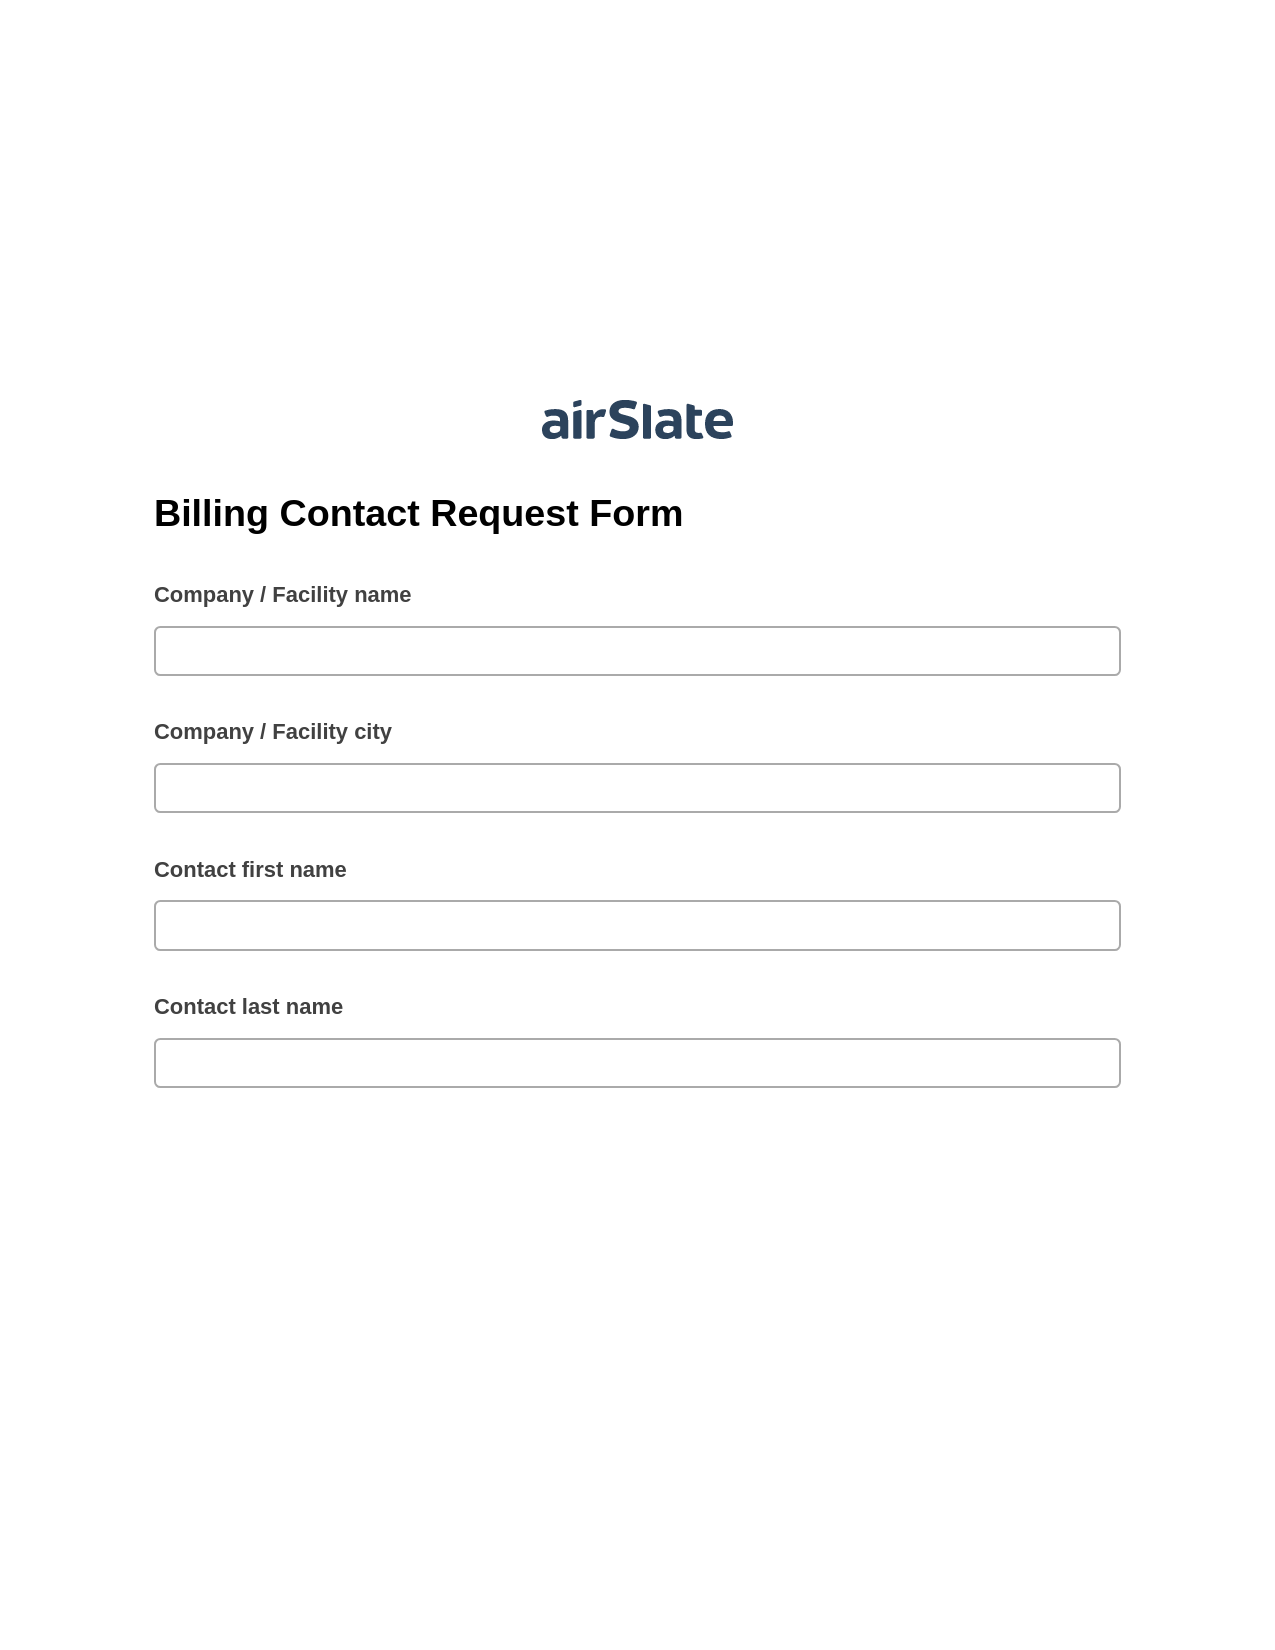 Billing Contact Request Form Pre-fill from Excel Spreadsheet Bot, SendGrid send Campaign bot, Dropbox Bot